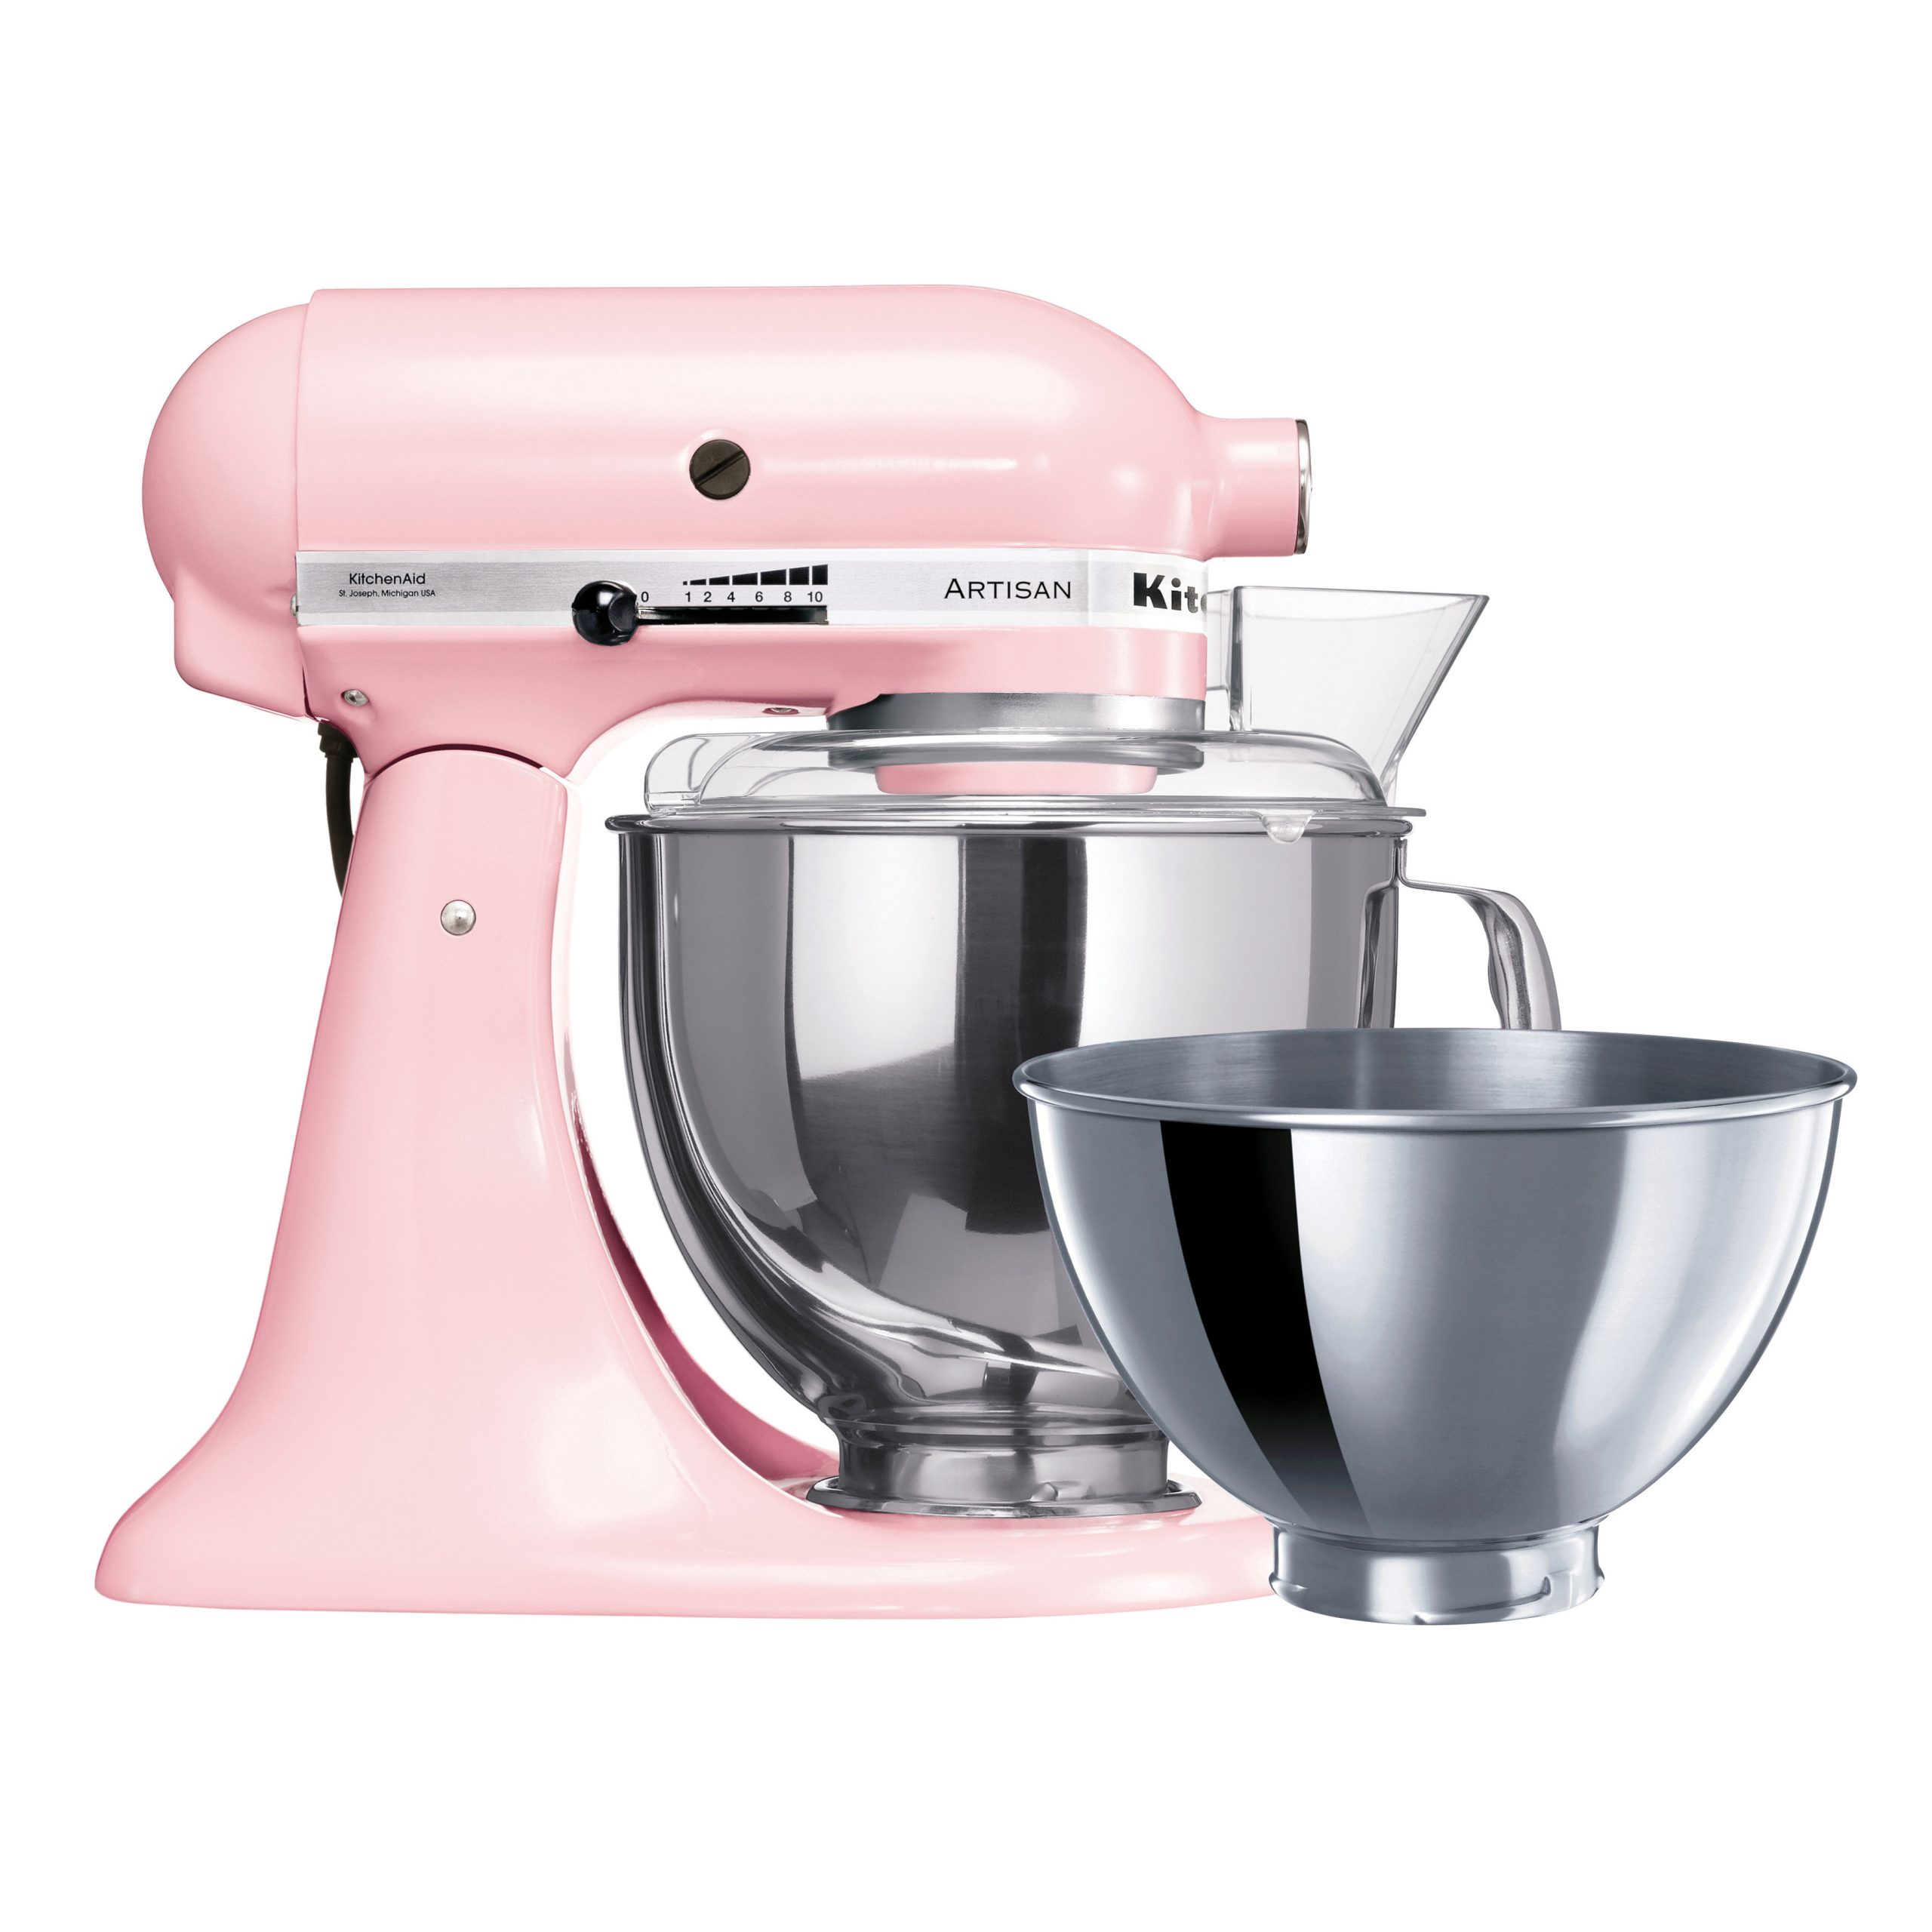 KitchenAid Artisan KSM160 Stand Mixer Pink | Chef's Complements